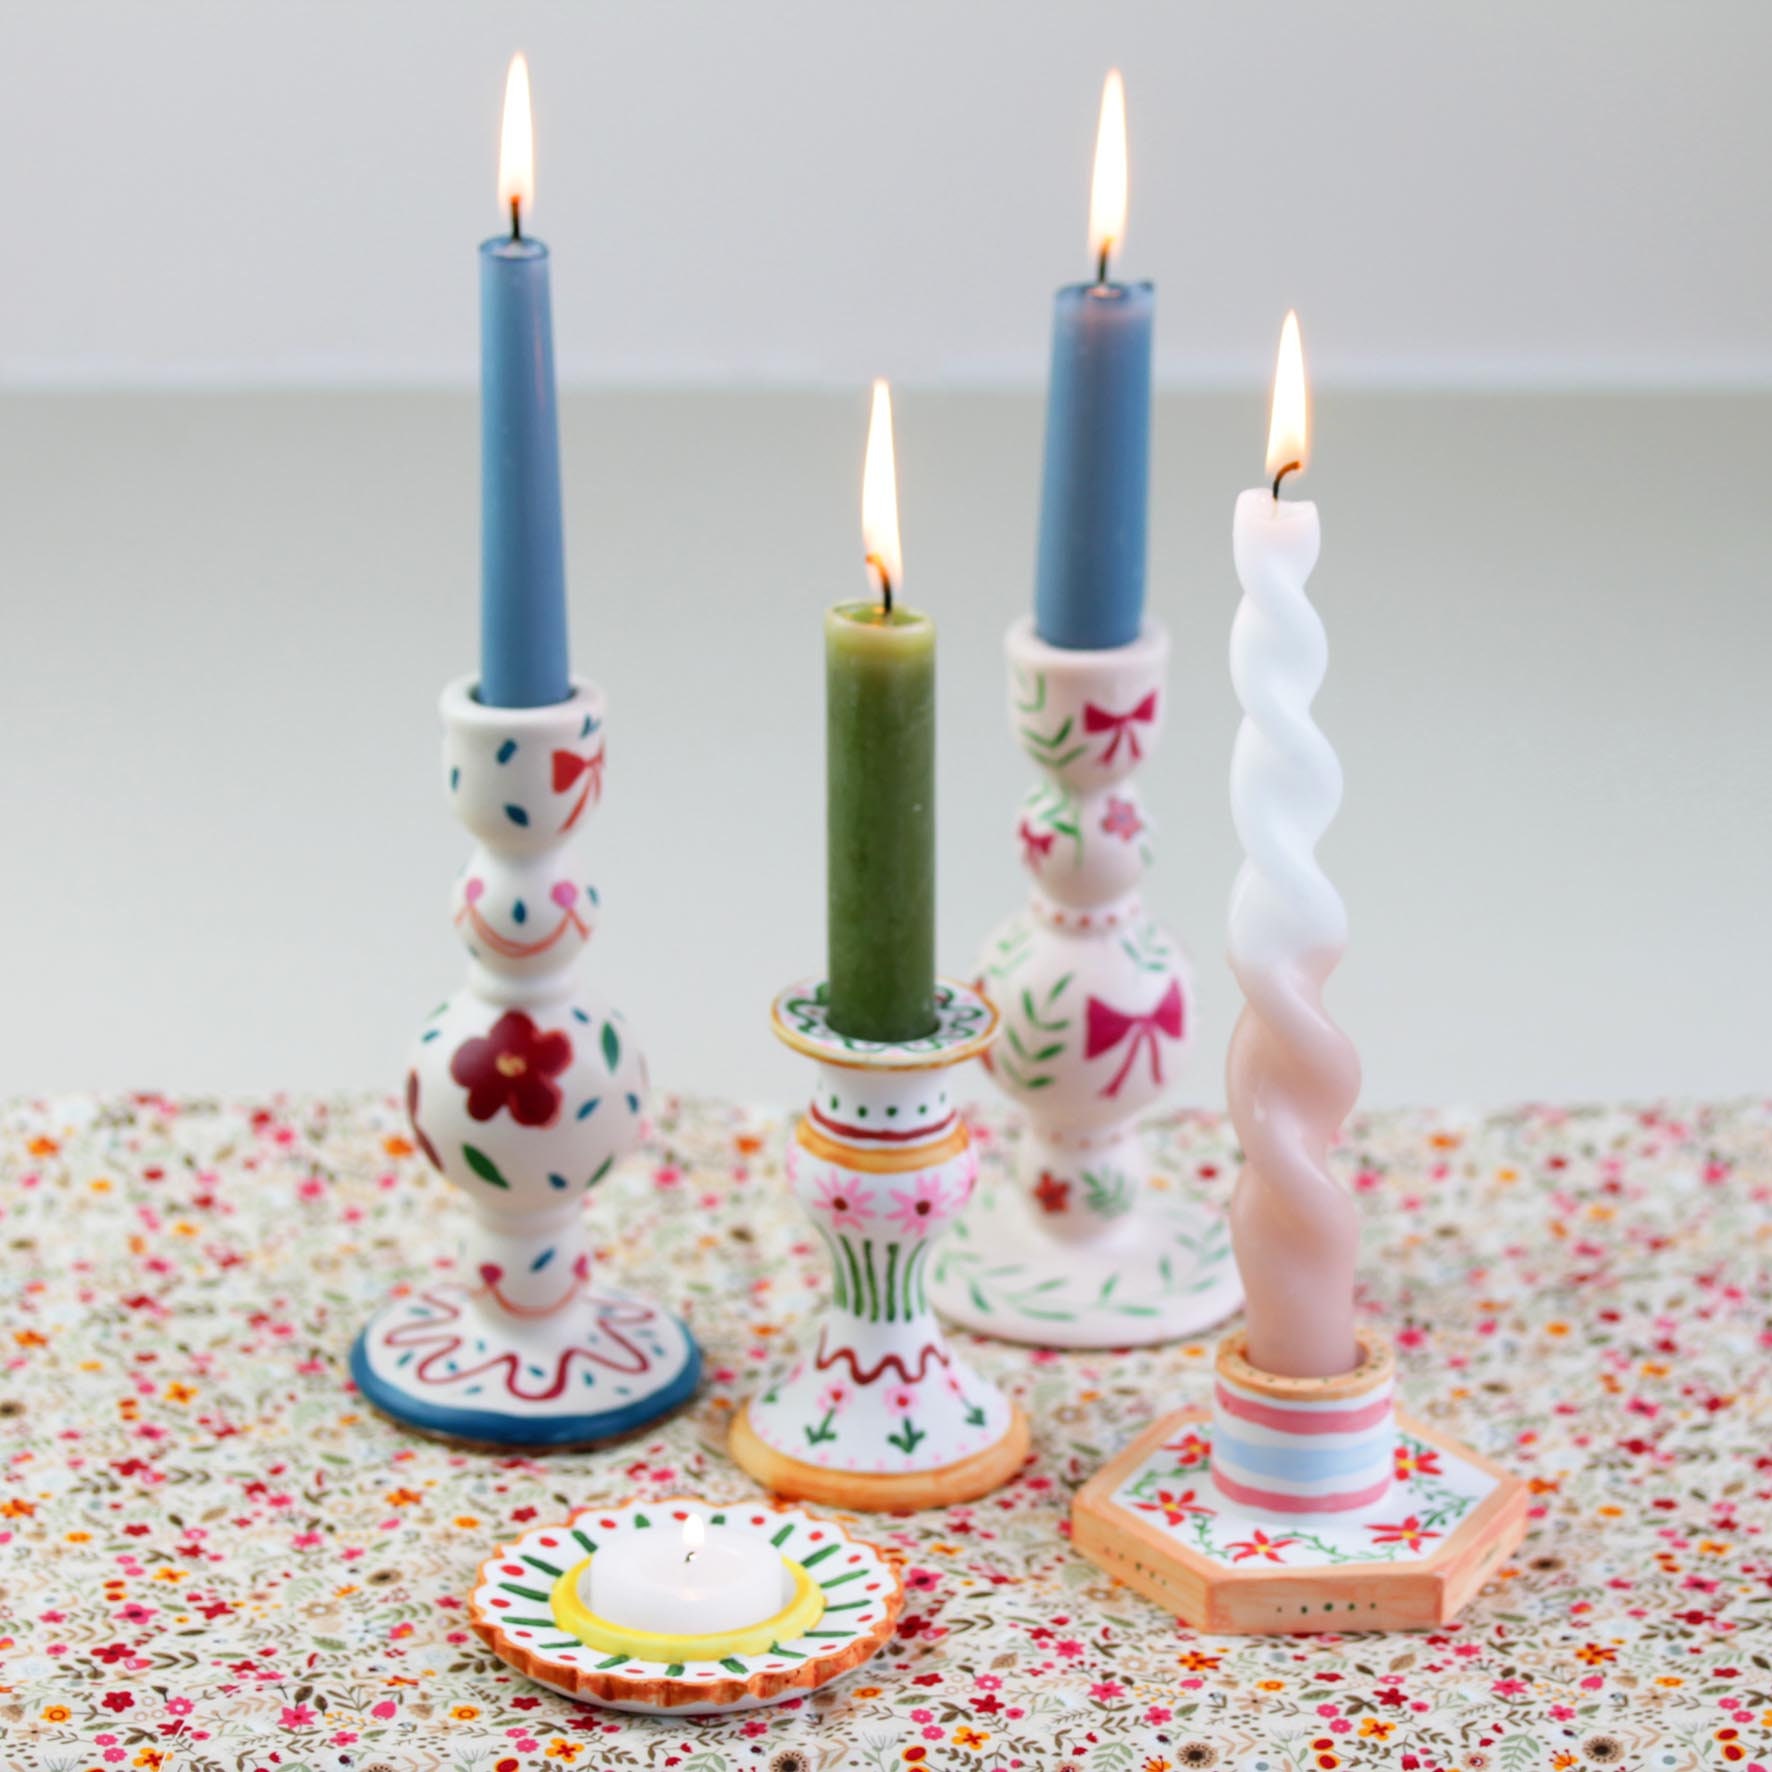 Paint Your Own Candle Holder Kit, Choice of 4 Designs, Craft Kit